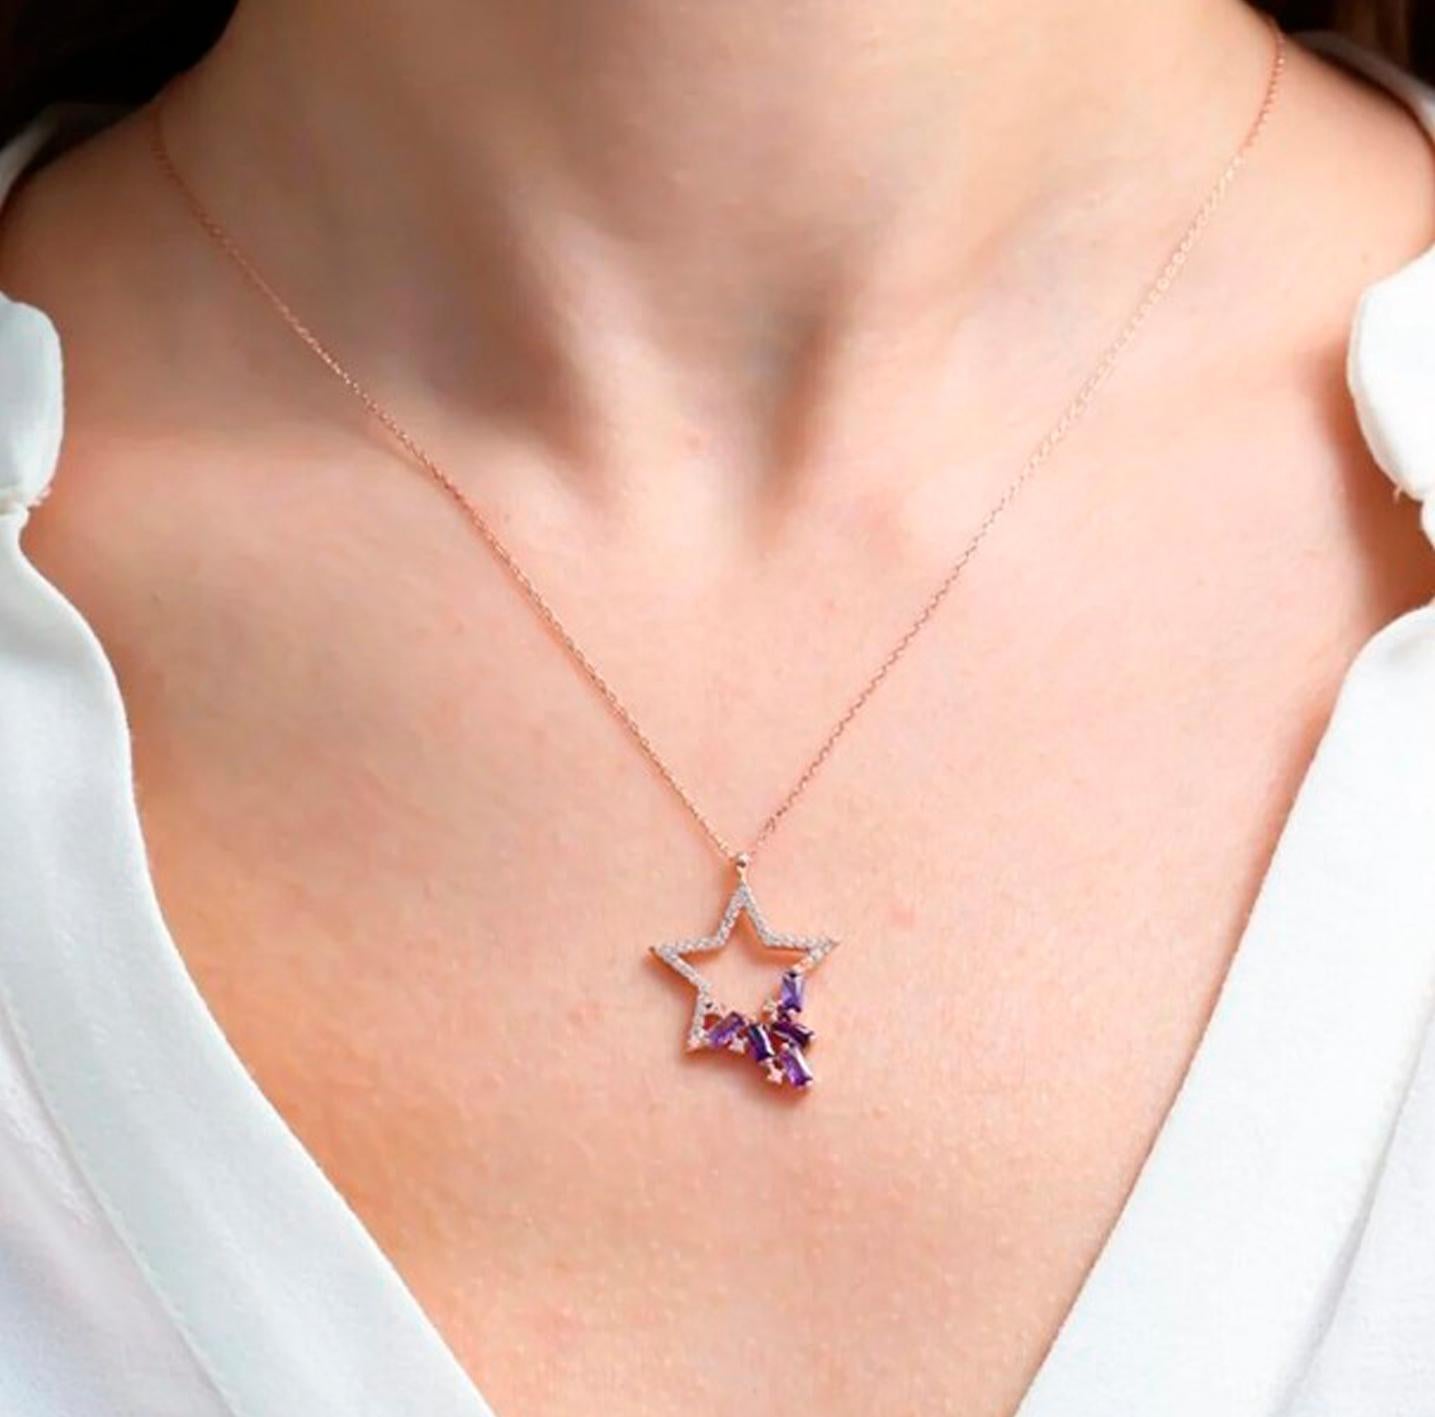 Star Pendant Necklace with Colored Gemstones, Chain Necklace with Star Pendant 2